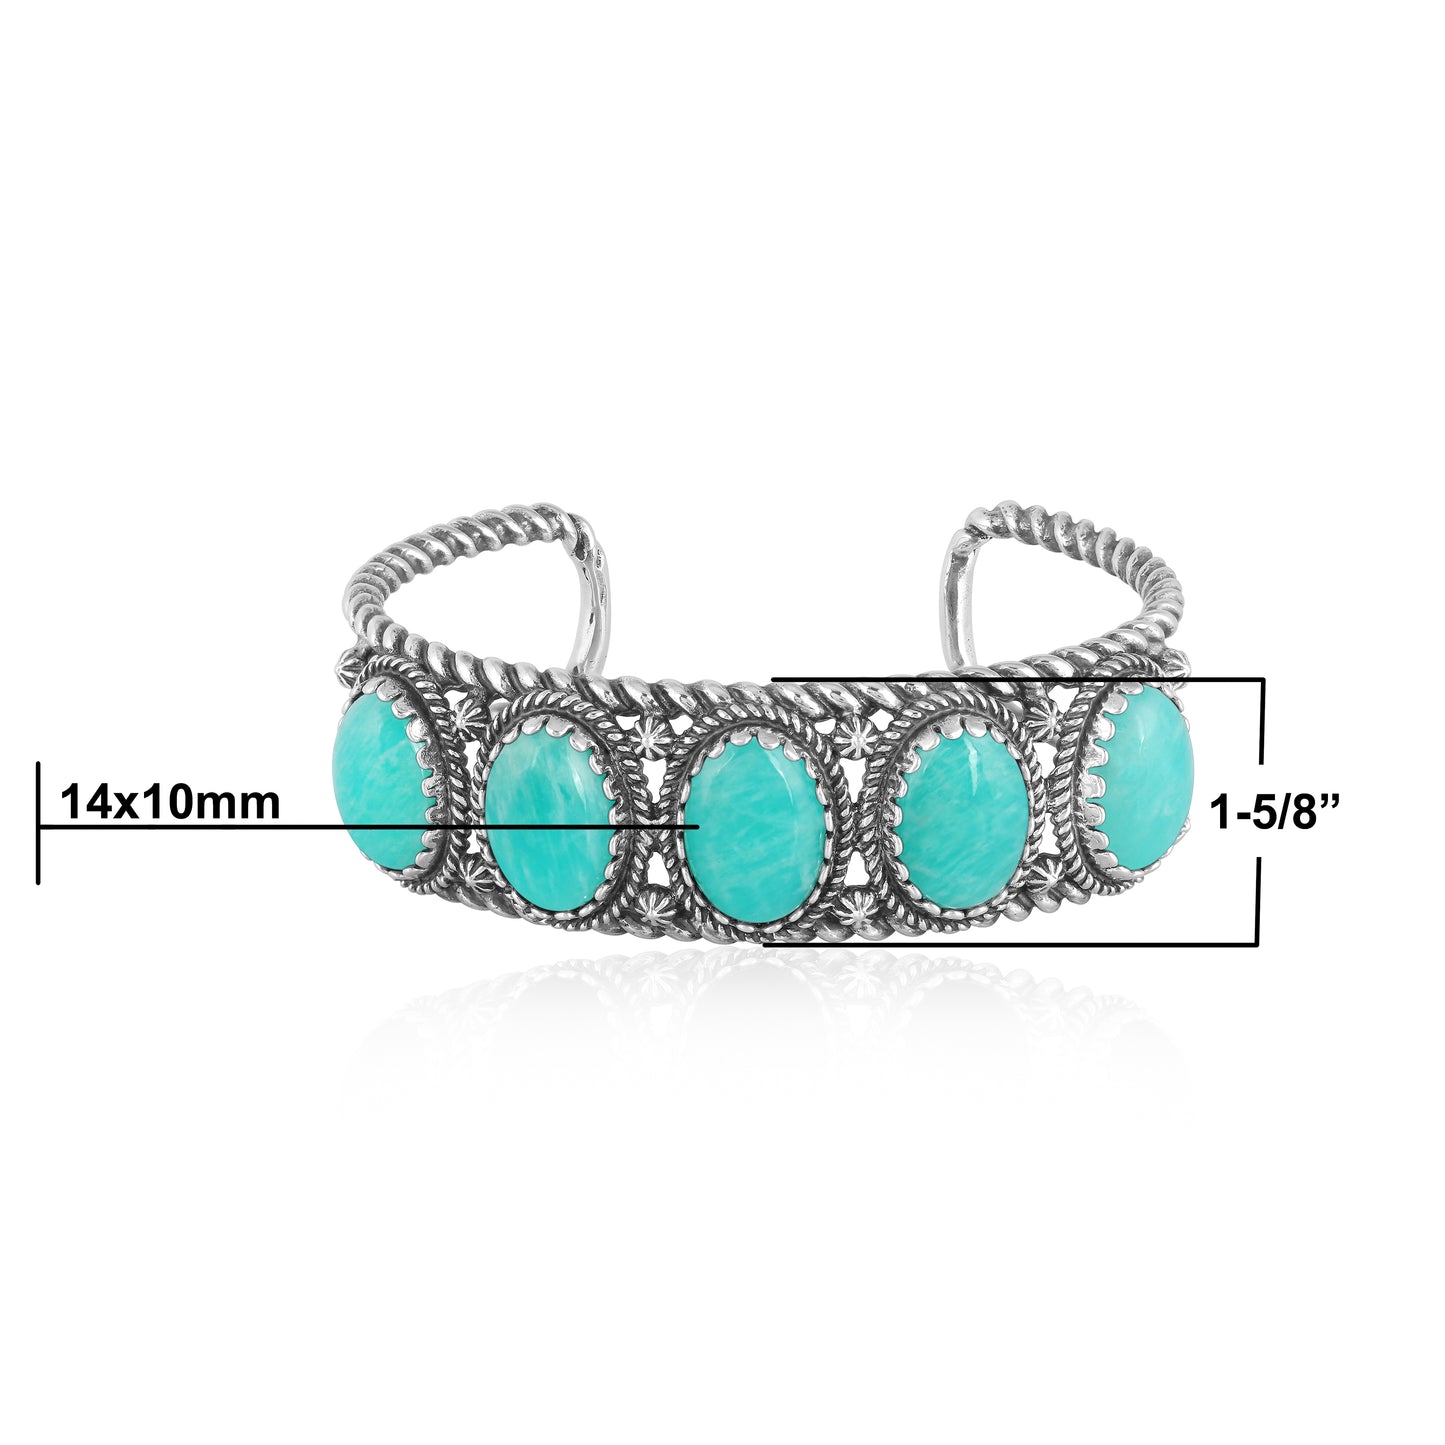 Southwestern Sterling Silver with Amazonite Gemstone Rope Design Women's Cuff Bracelet, Size Small - Large